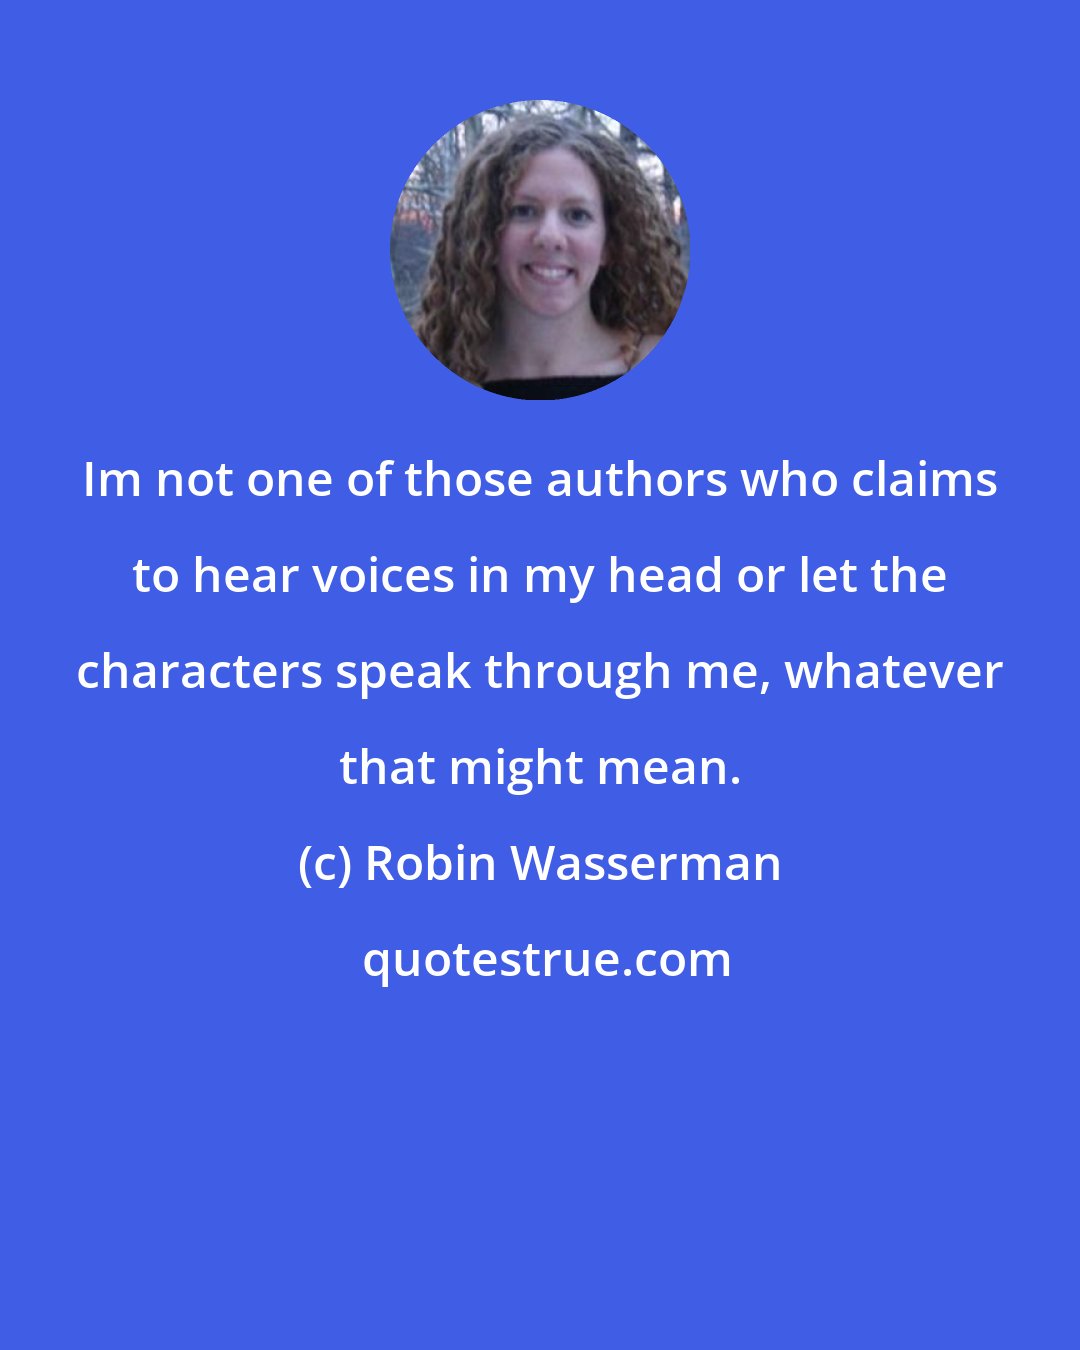 Robin Wasserman: Im not one of those authors who claims to hear voices in my head or let the characters speak through me, whatever that might mean.